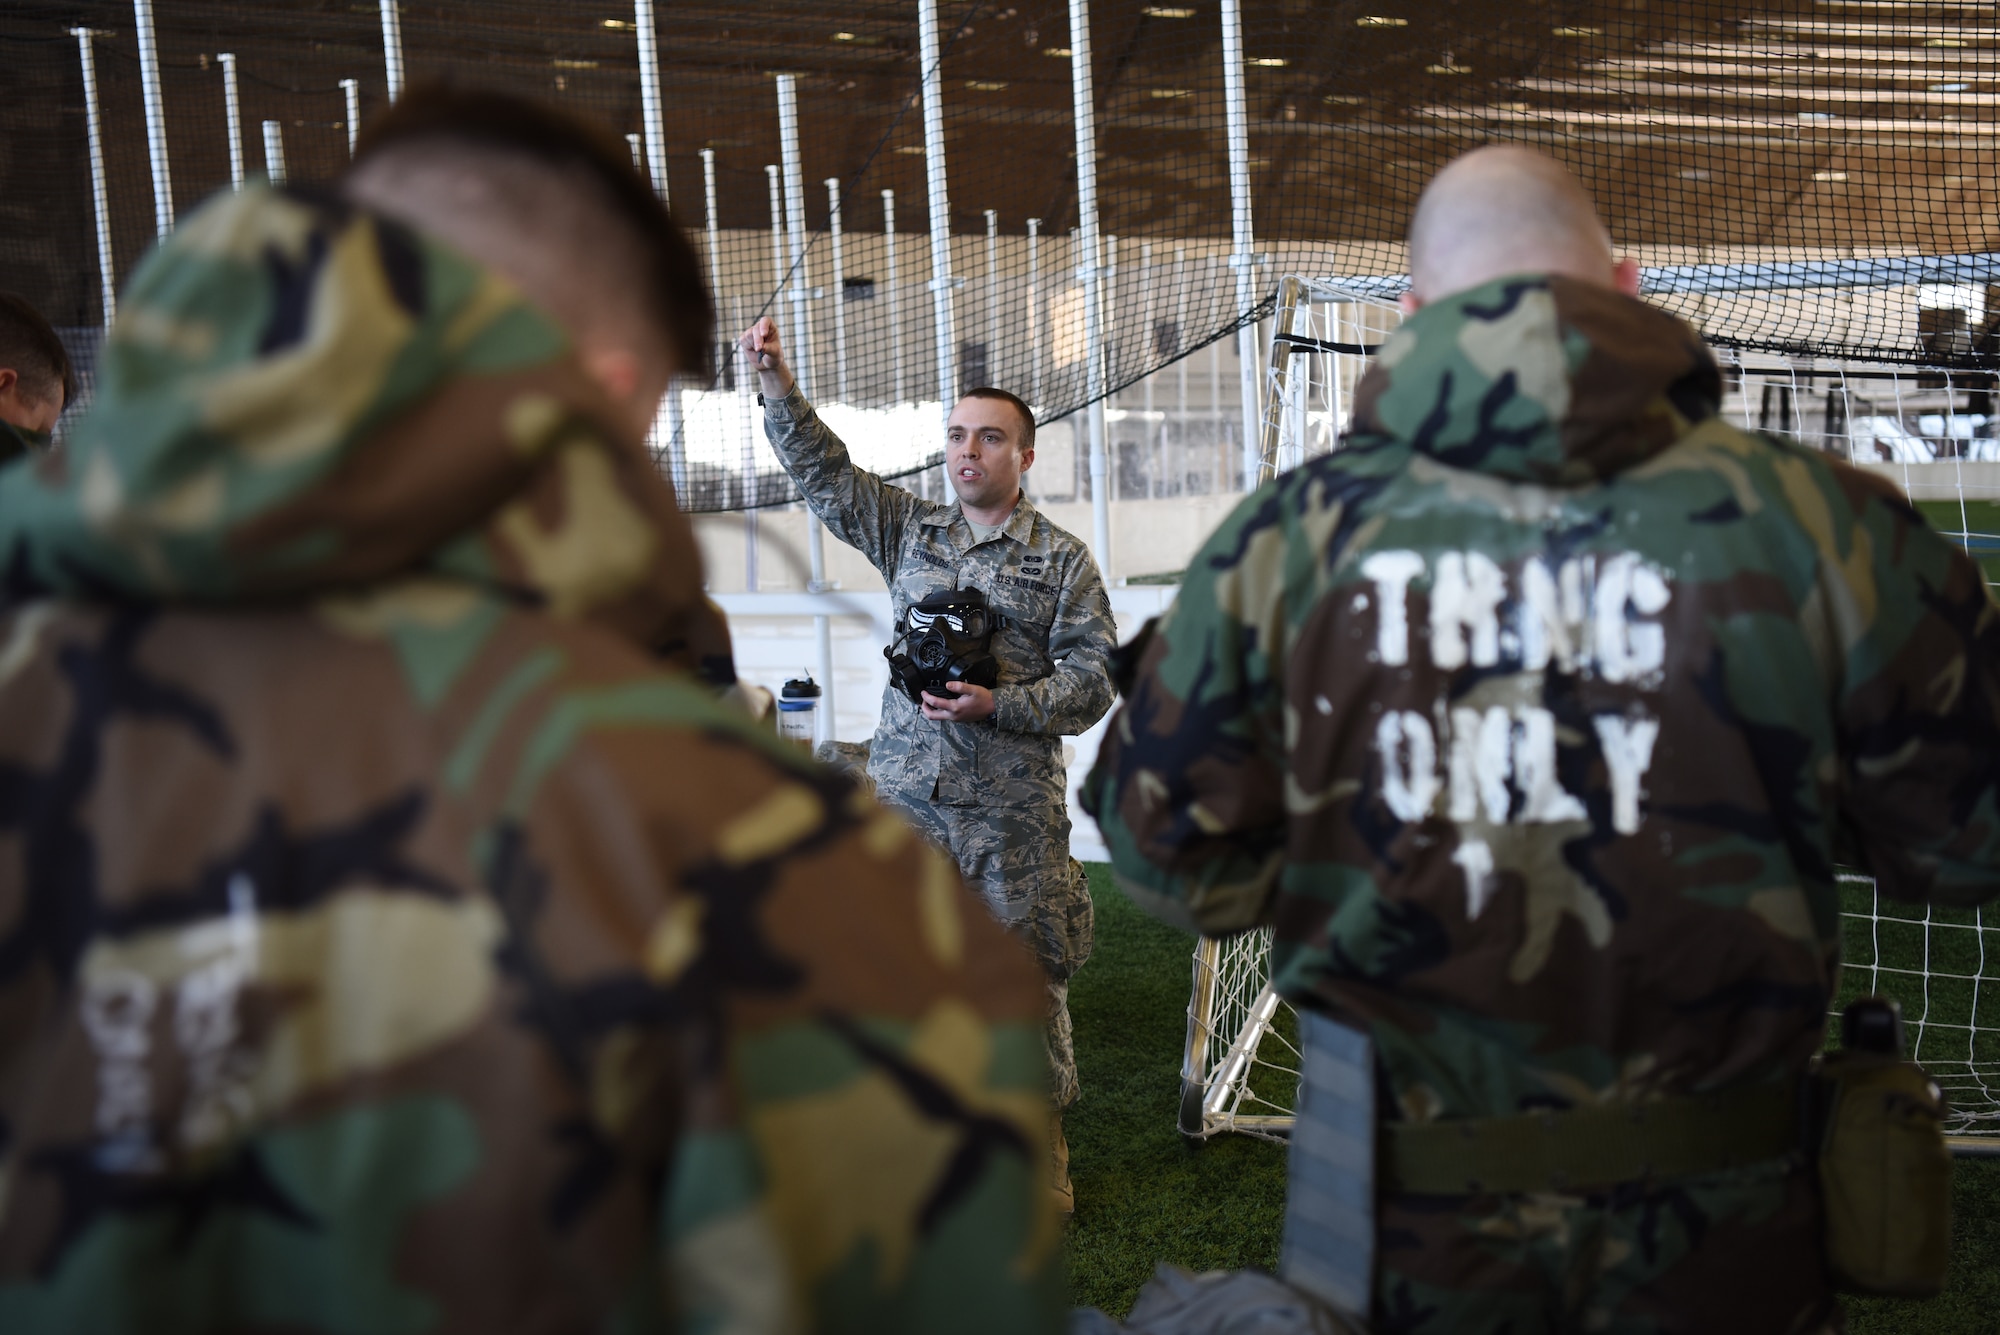 Staff Sgt. Ronald Reynolds, a 28th Civil Engineer Squadron emergency management technician, instructs Airmen on the fundamentals of a gas mask during chemical, biological, radiological, nuclear and environmental training at Ellsworth Air Force Base, S.D., March 14, 2018. During the course, instructors demonstrated how to properly store and wear mission oriented protective posture gear, cover military assets, and test surfaces for chemical agents. (U.S. Air Force photo by Airman 1st Class Donald C. Knechtel)